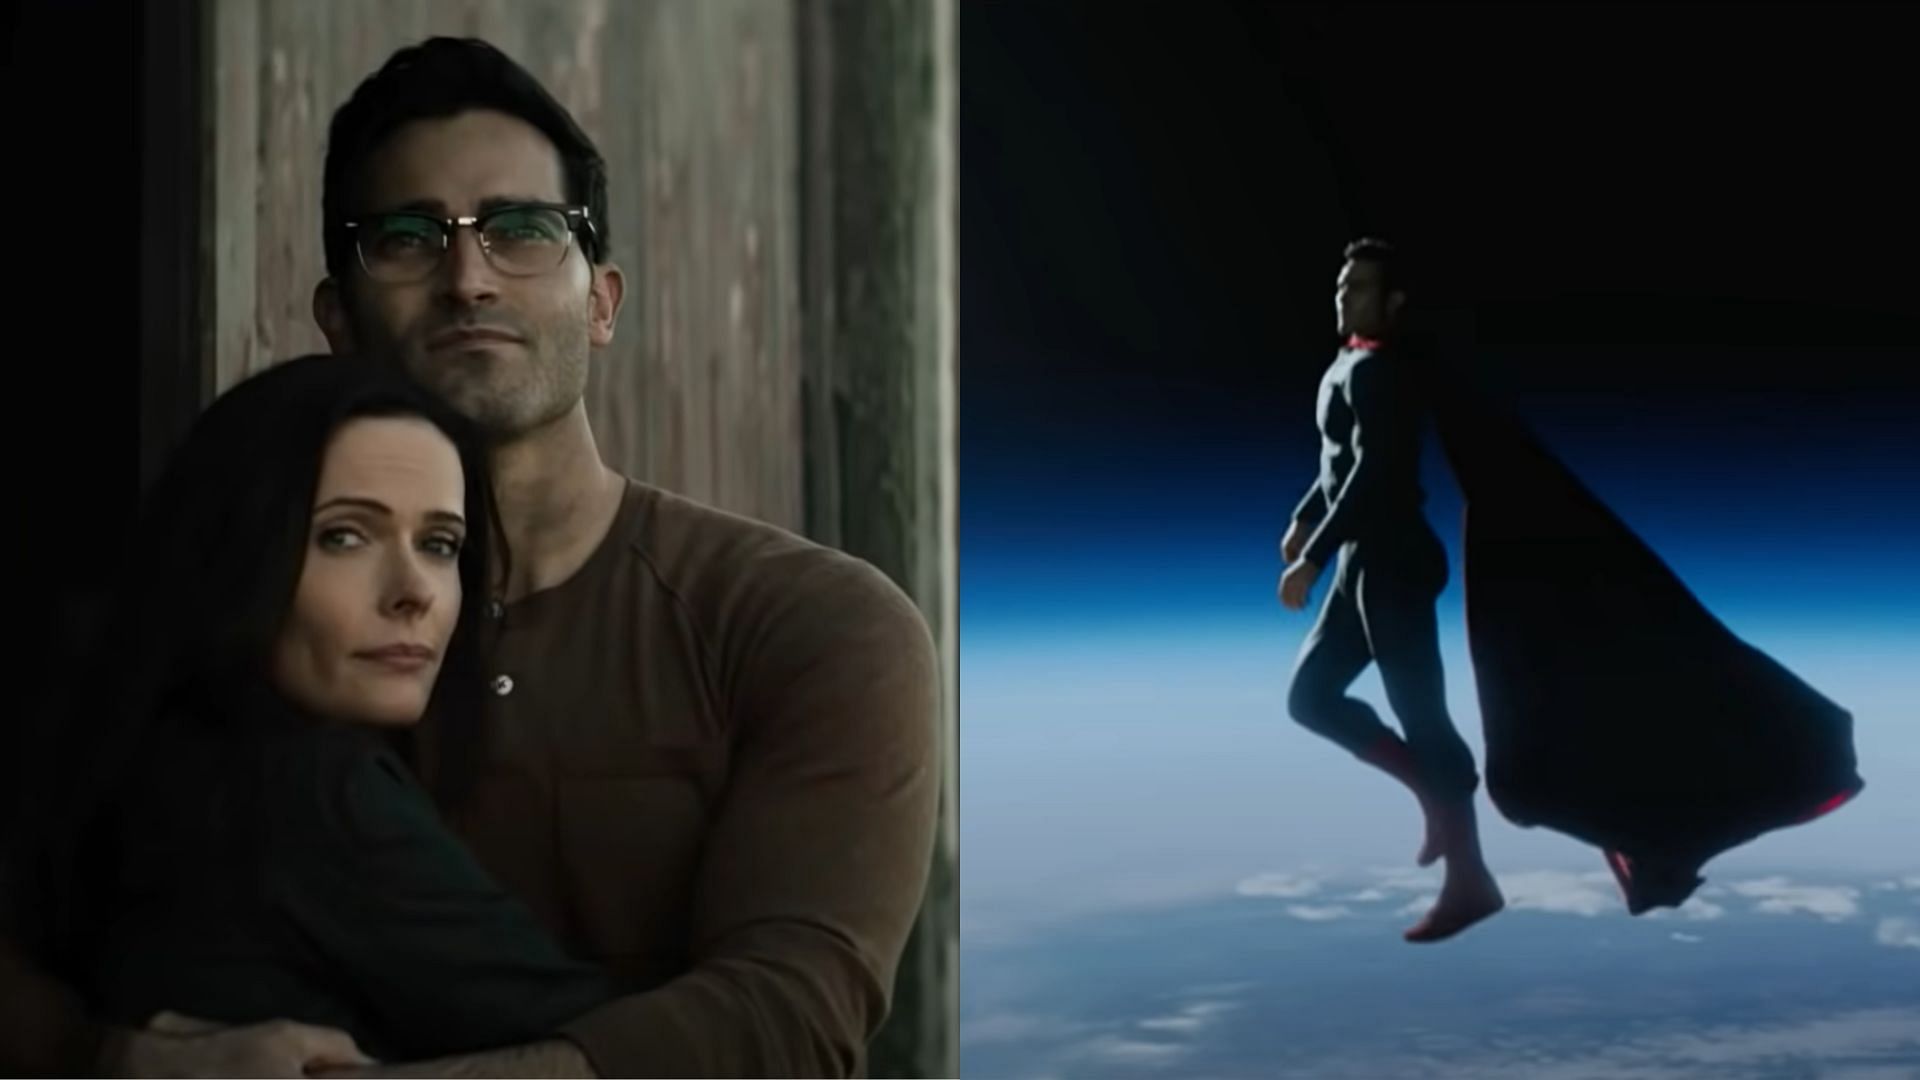 The strikes in Hollywood have affected production of Superman and Lois season 4 (Image via DC)